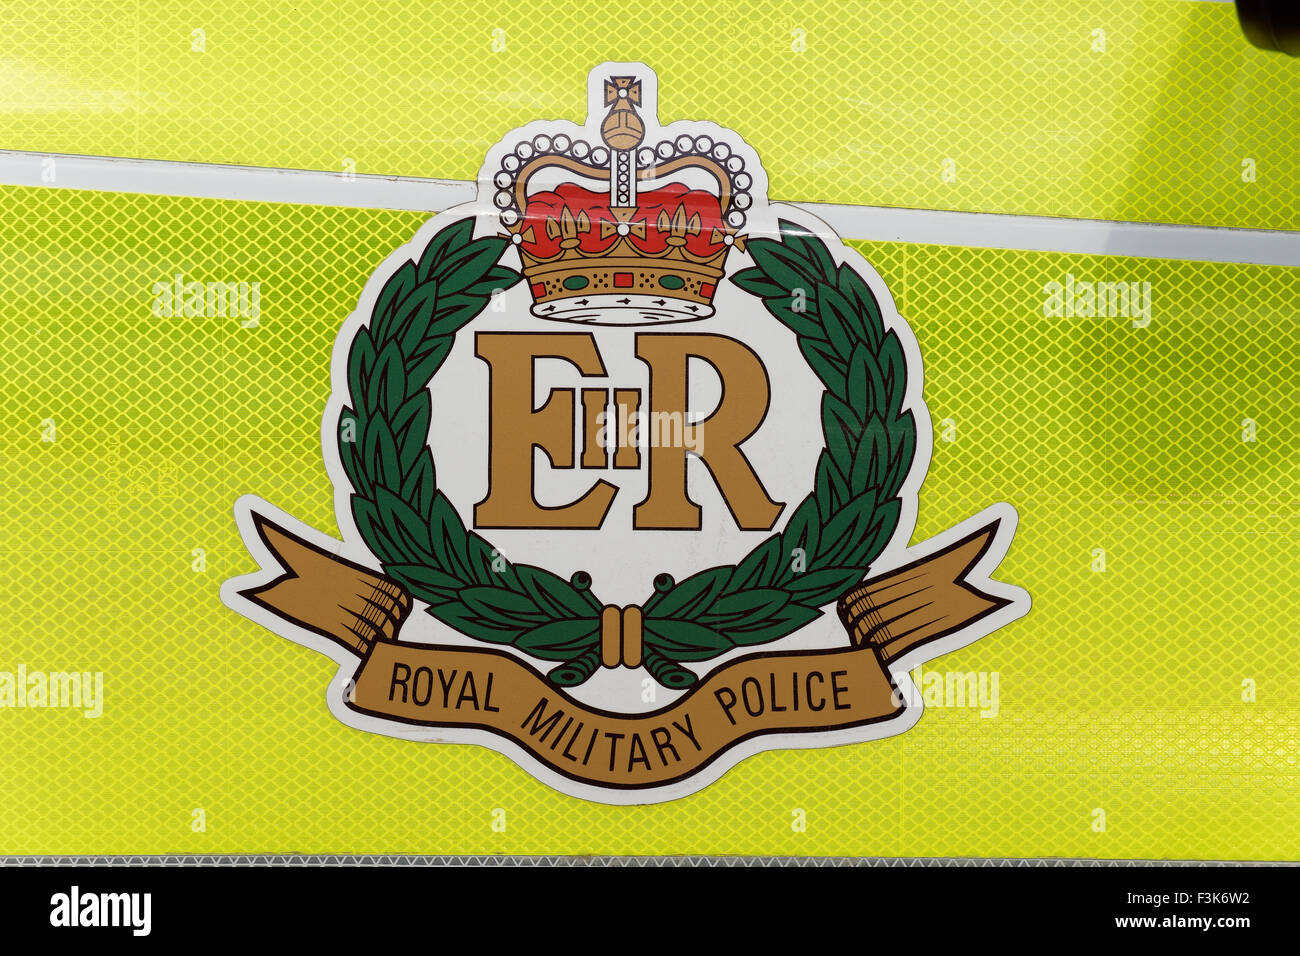 Royal Military Police Crest on Police Car Stock Photo